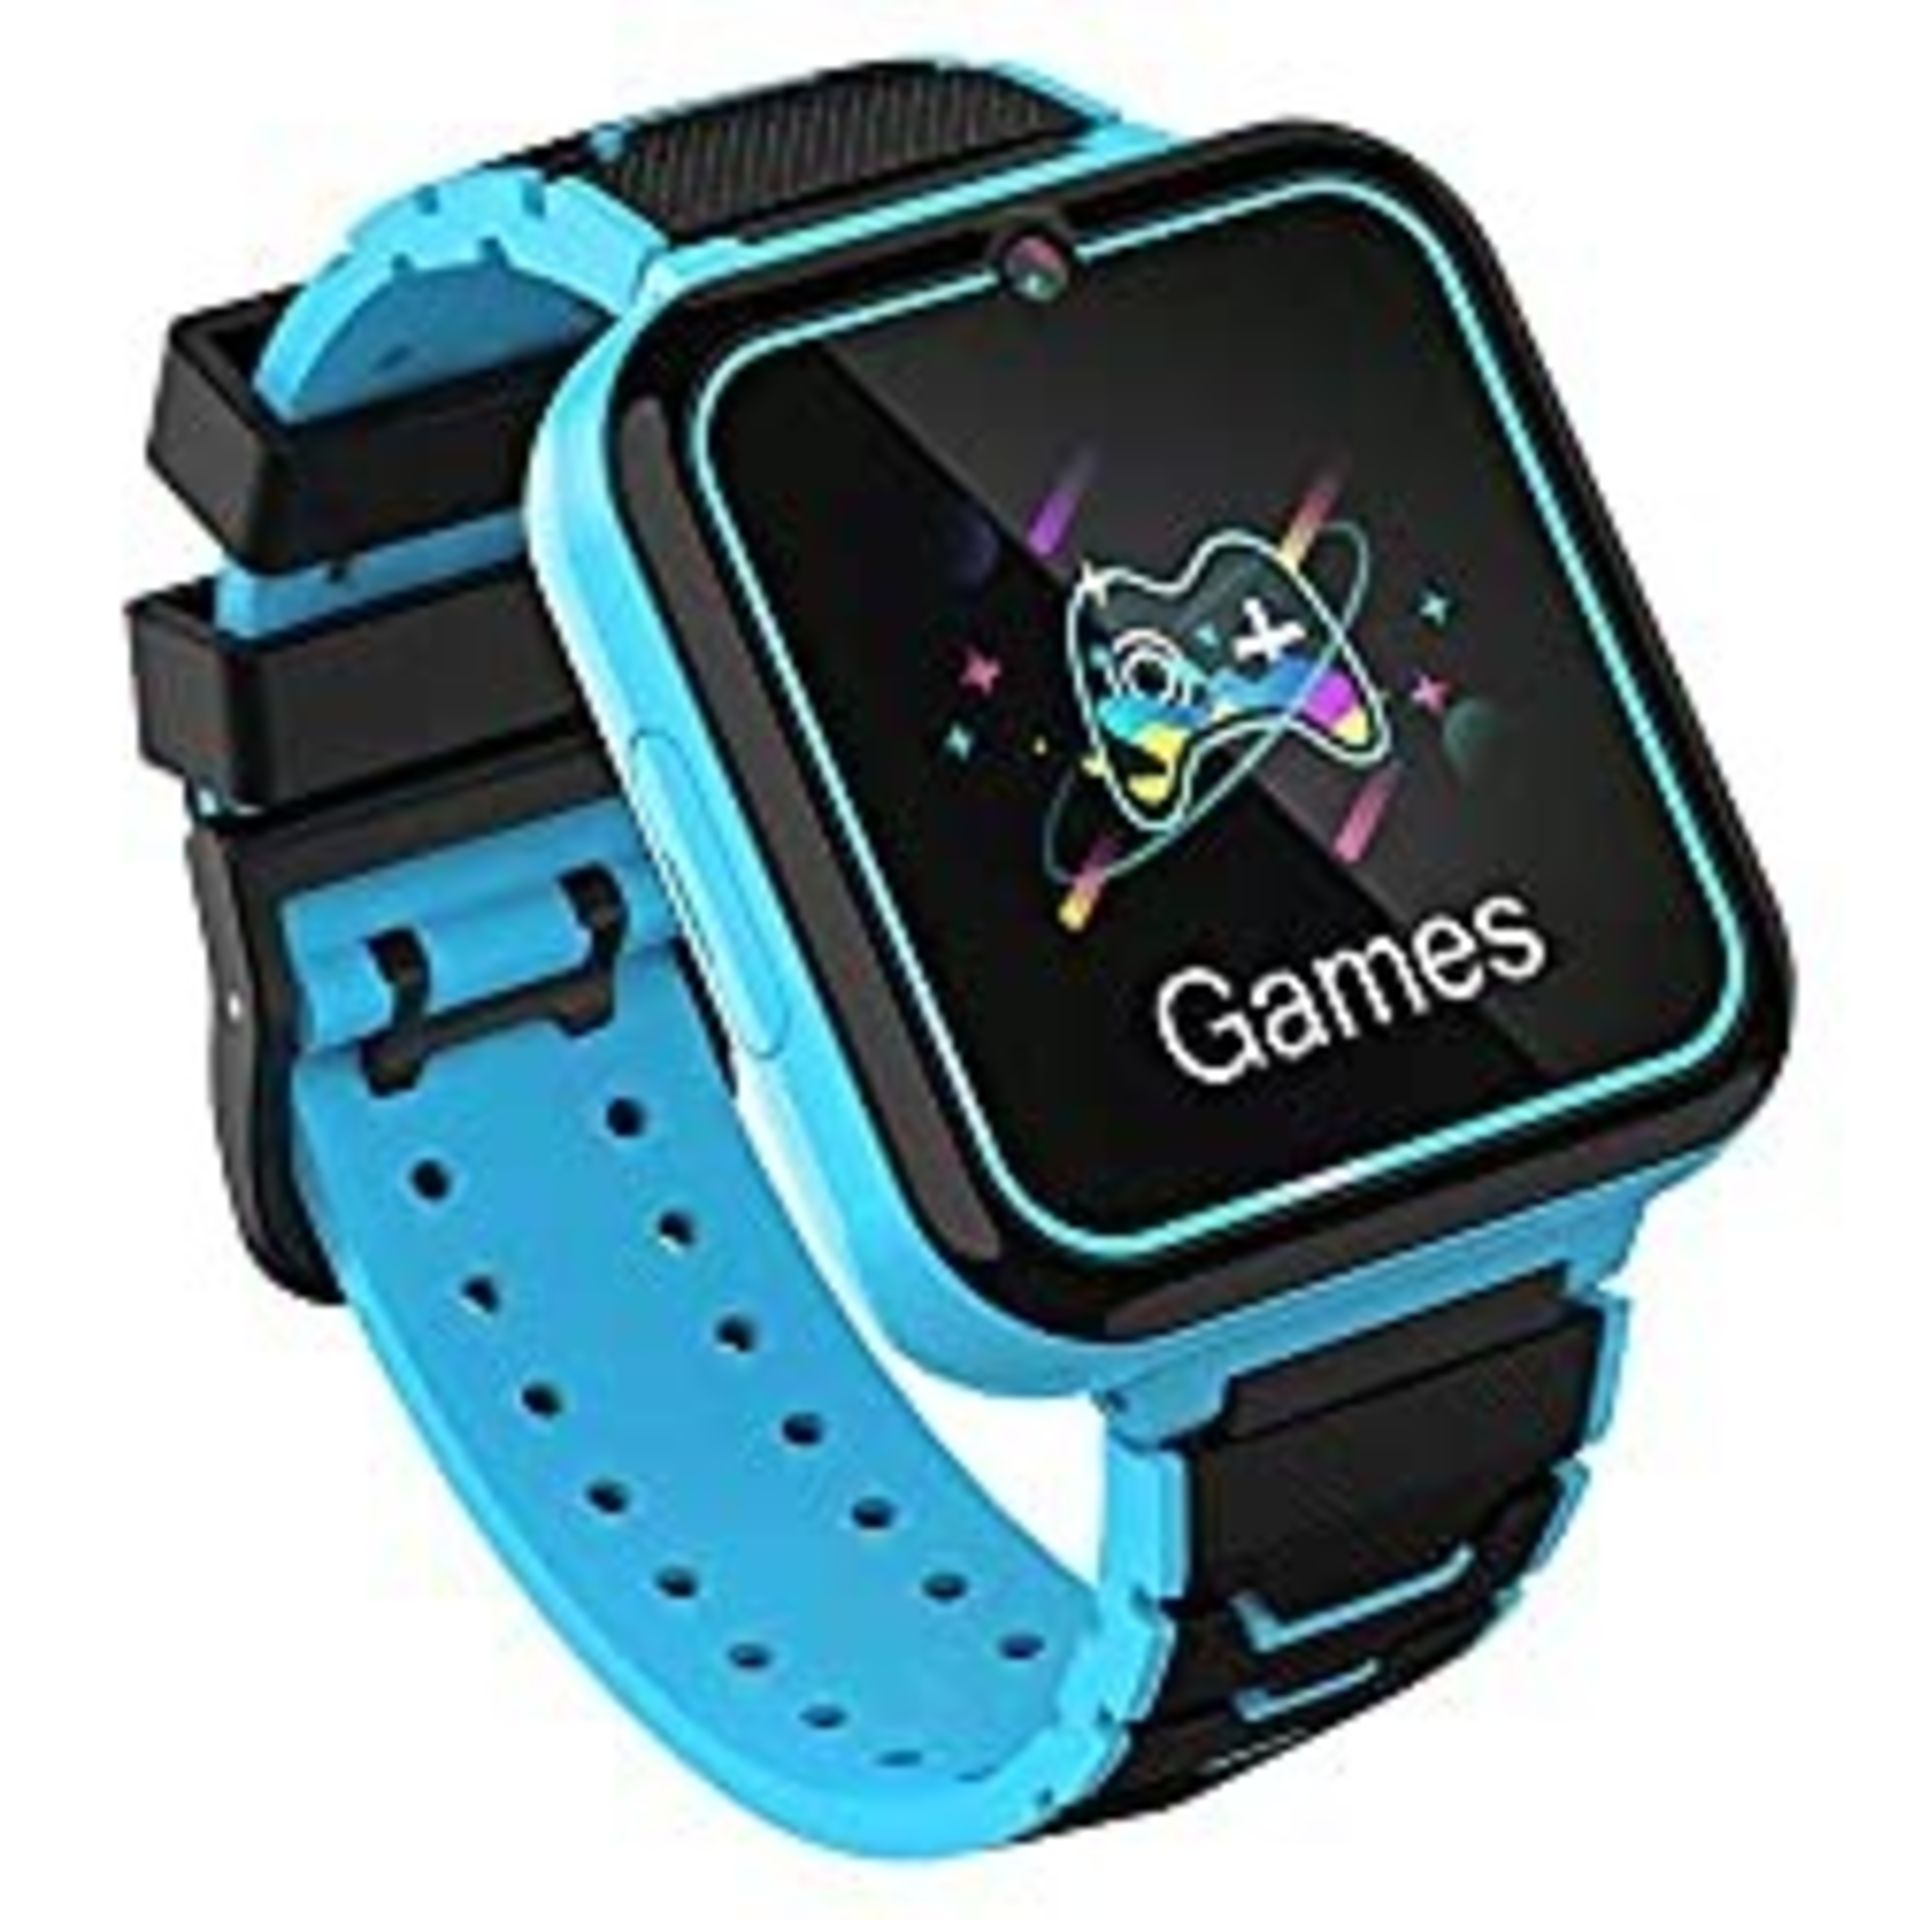 Kids Smartwatch Phone for Boys Girls with HD Touch Screen, Smart Watch for Kids with Games Musi